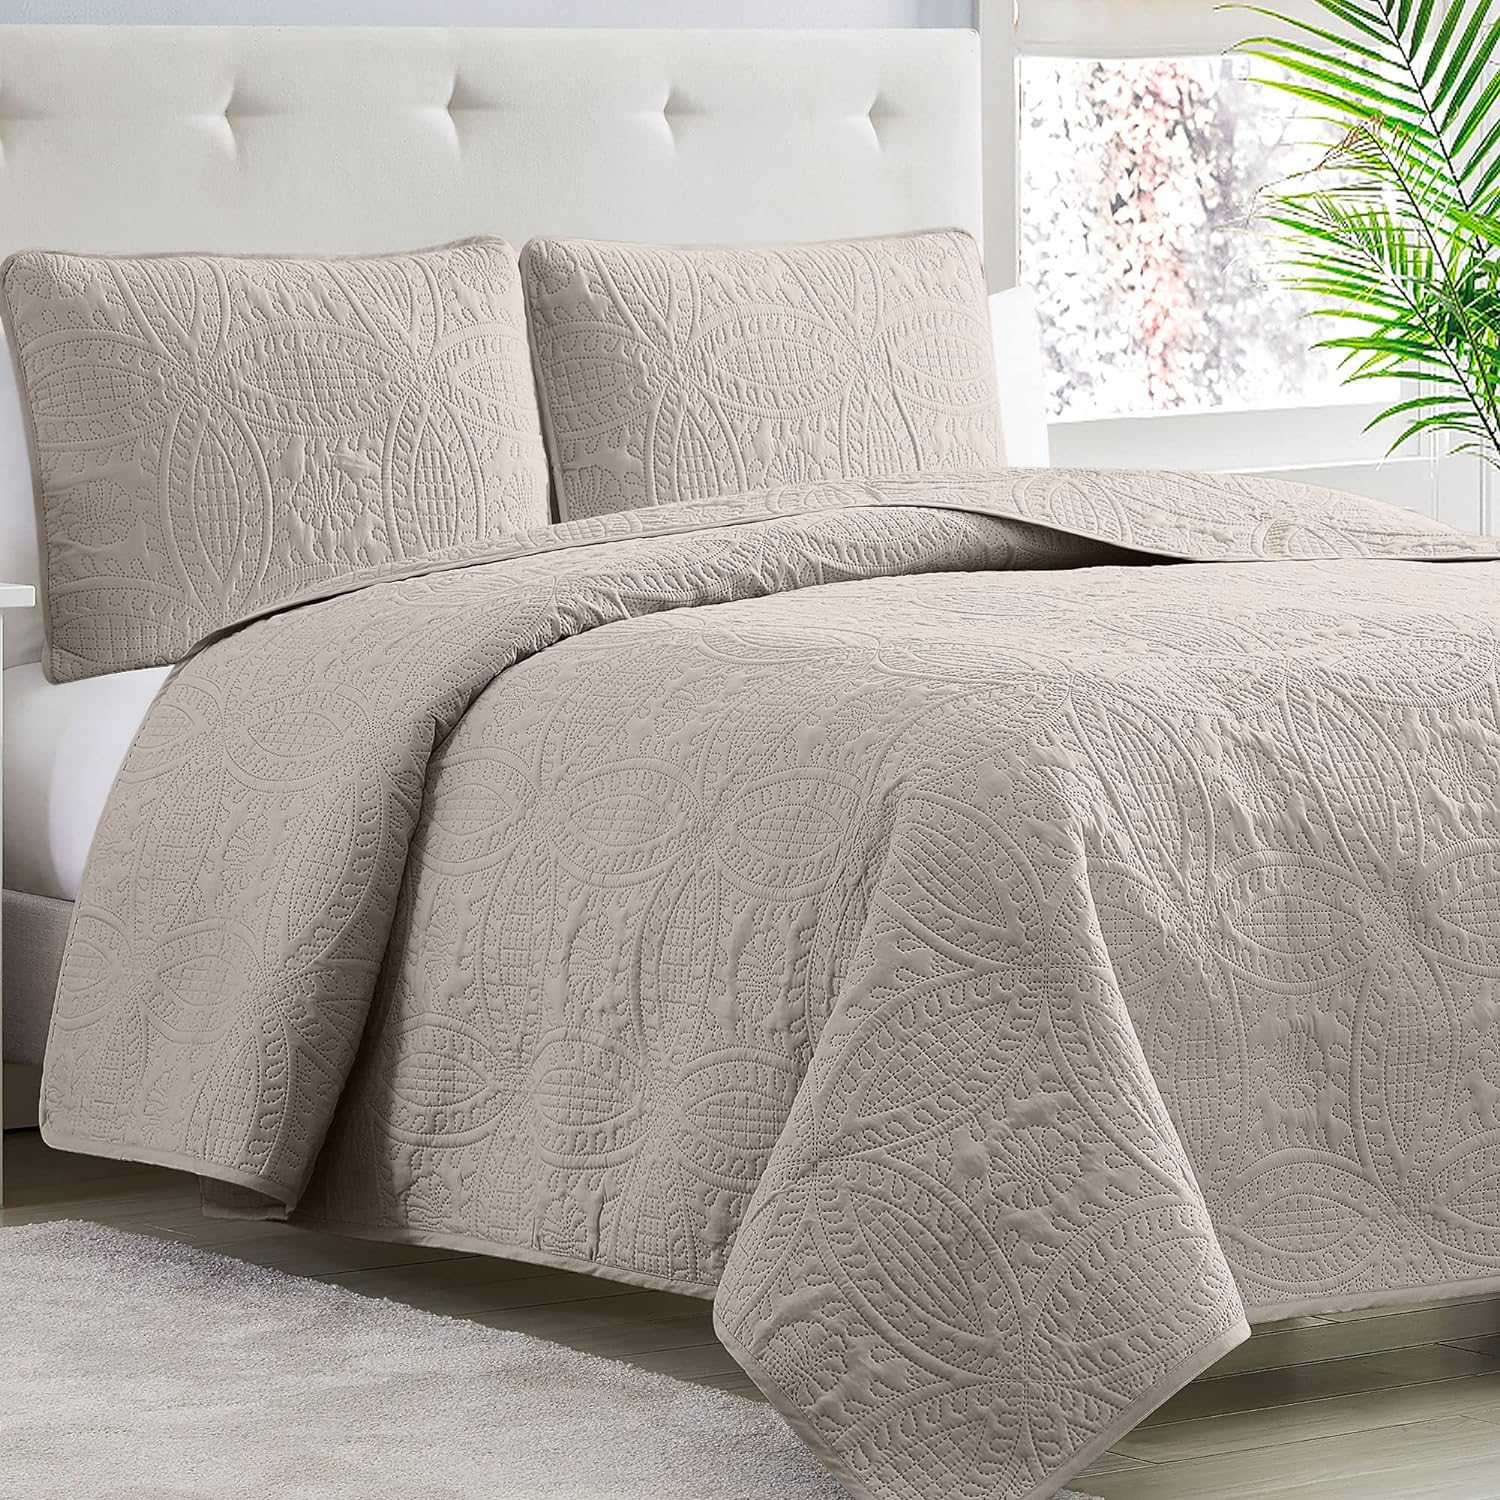 Mellanni Bedspread Coverlet Set - Bedding Cover with Shams - Ultrasonic Quilting Technology - 3 Piece Oversized Quilt Set - Bedspreads & Coverlets (Full/Queen, Beige) 